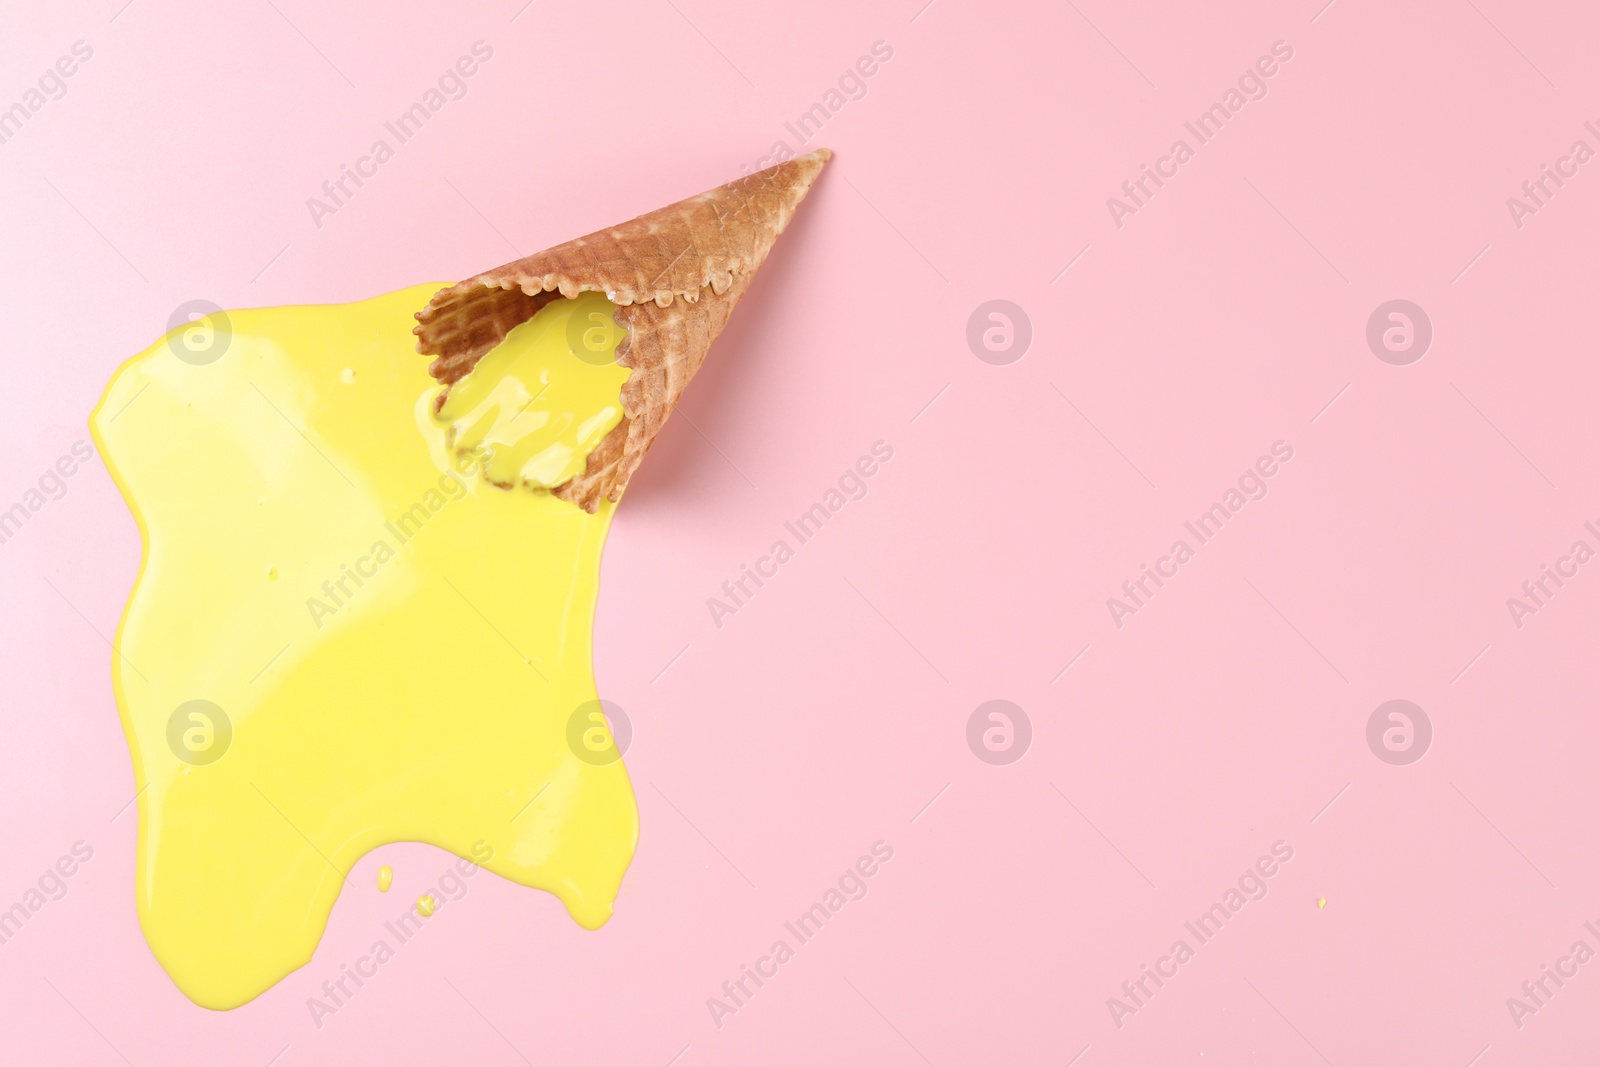 Photo of Melted ice cream and wafer cone on pink background, top view. Space for text